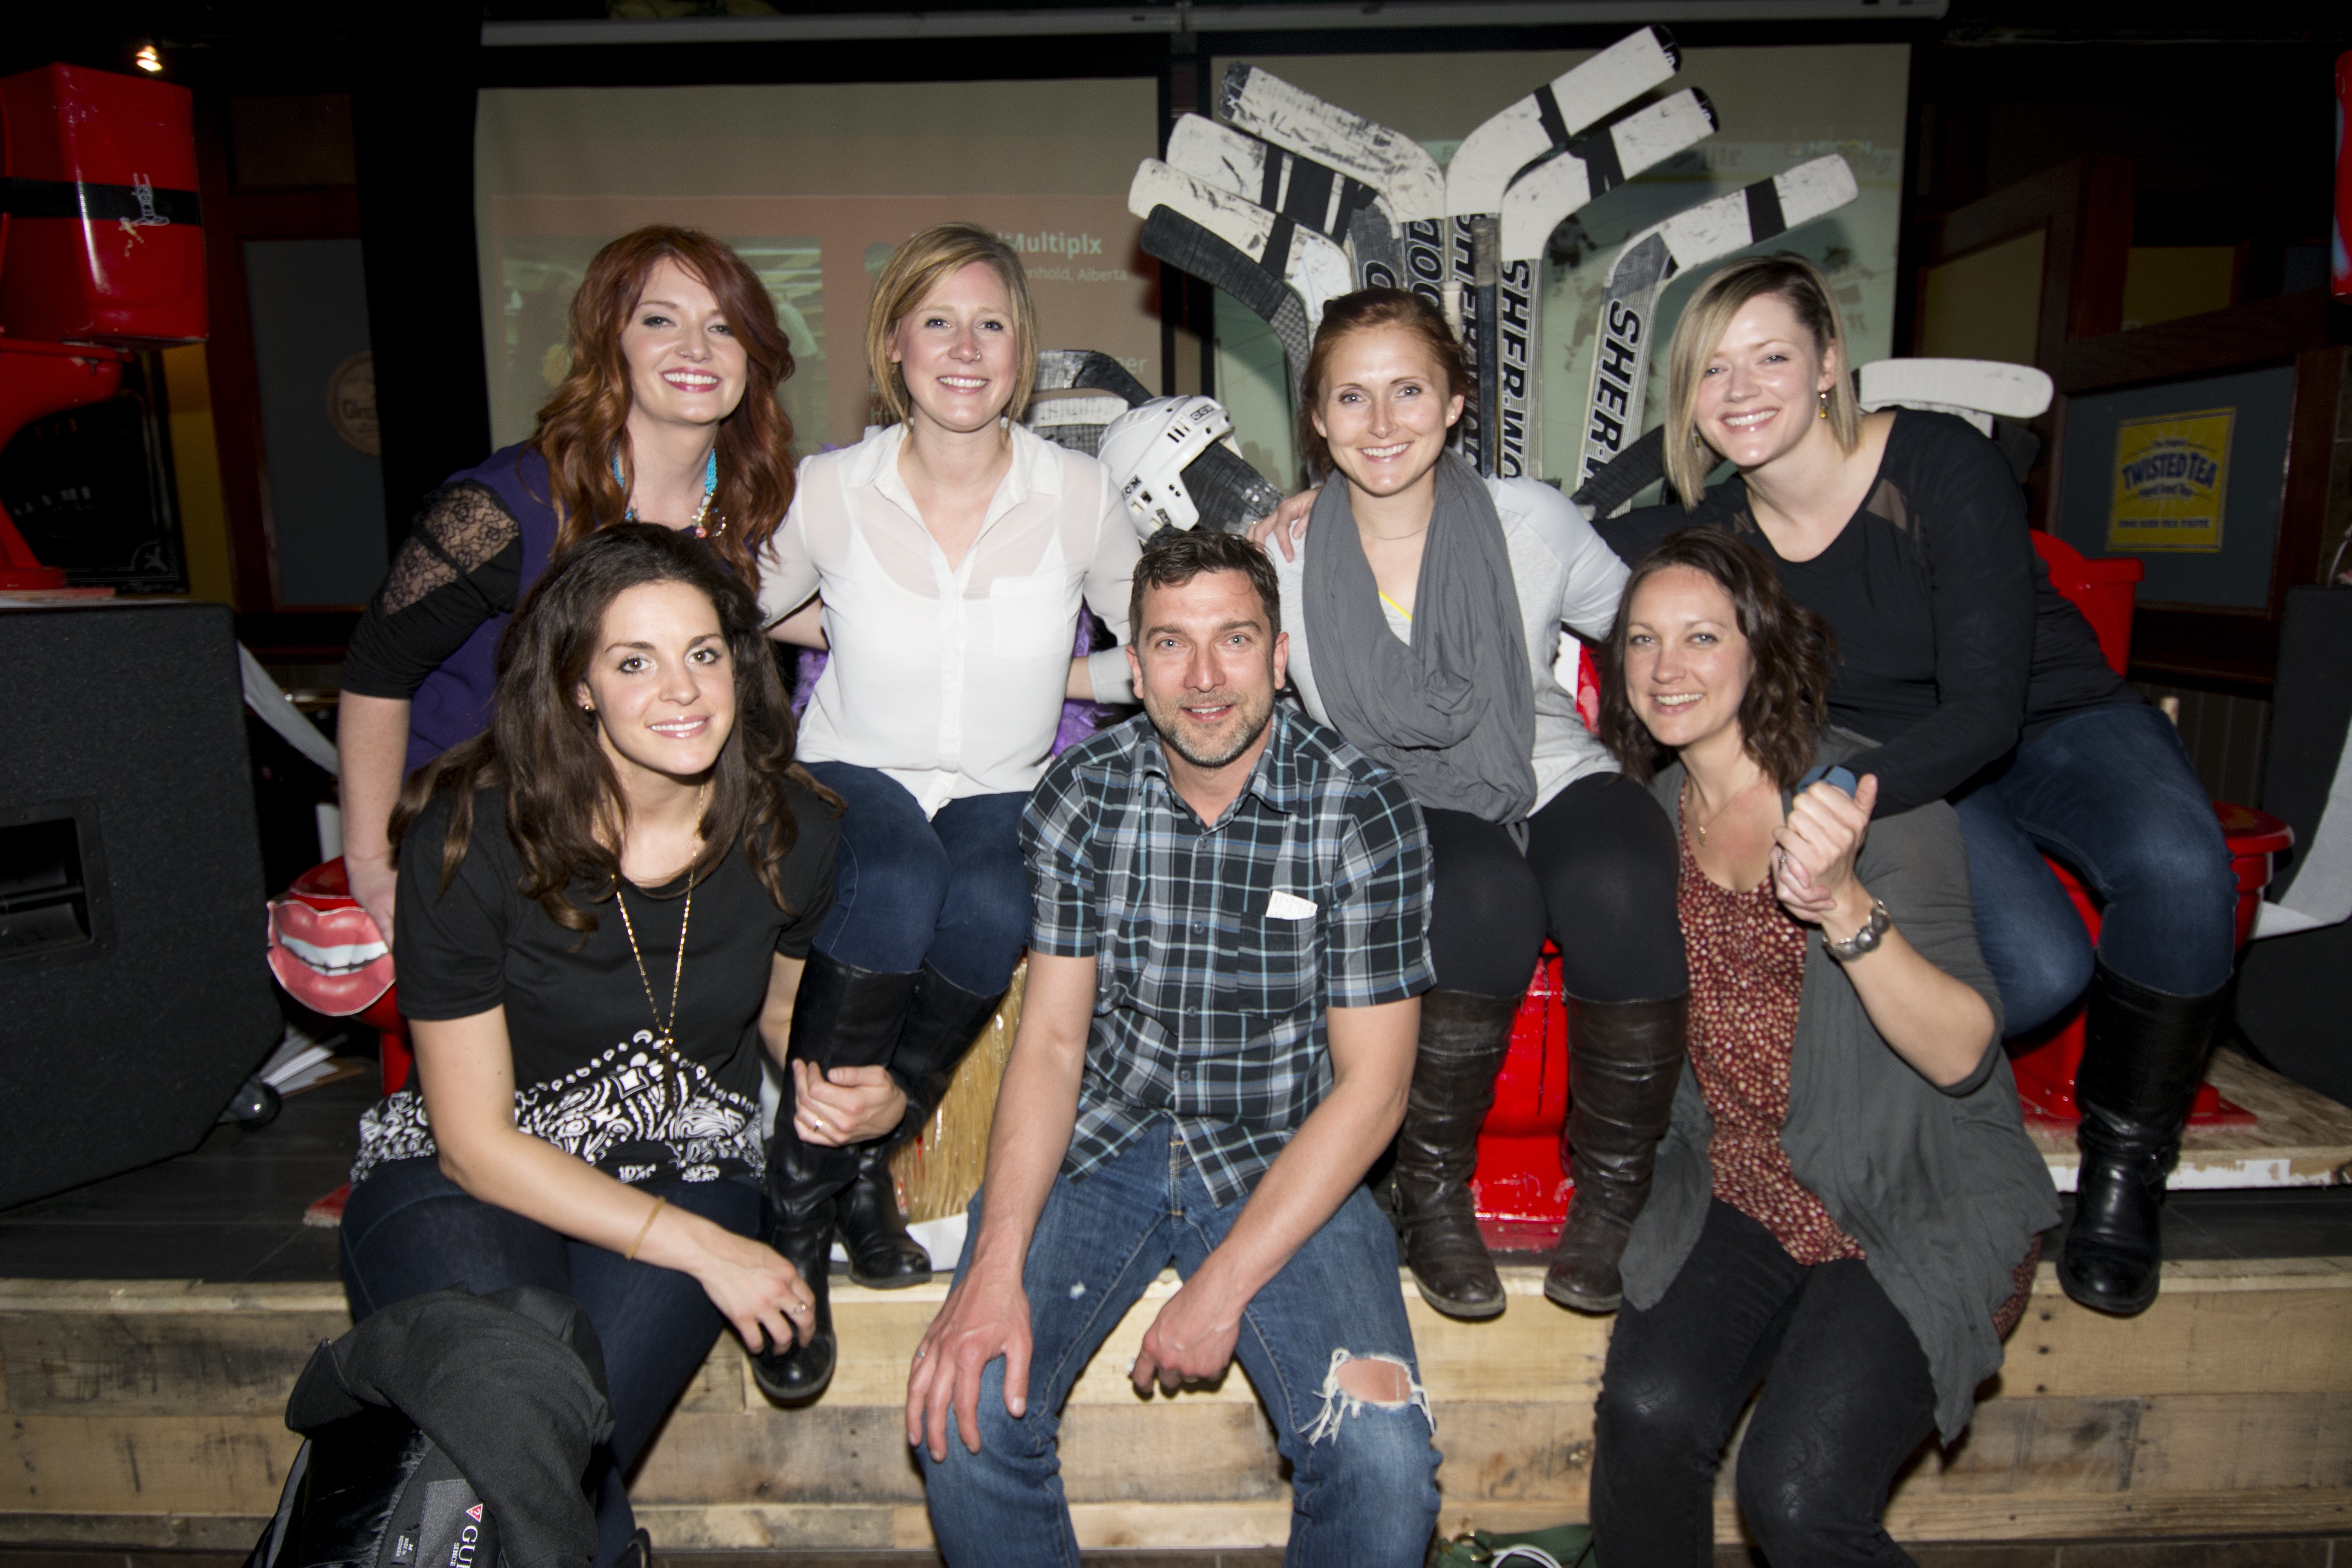 SUCCESSFUL FUNDRAISING – Game of Thrones event organizers top from left